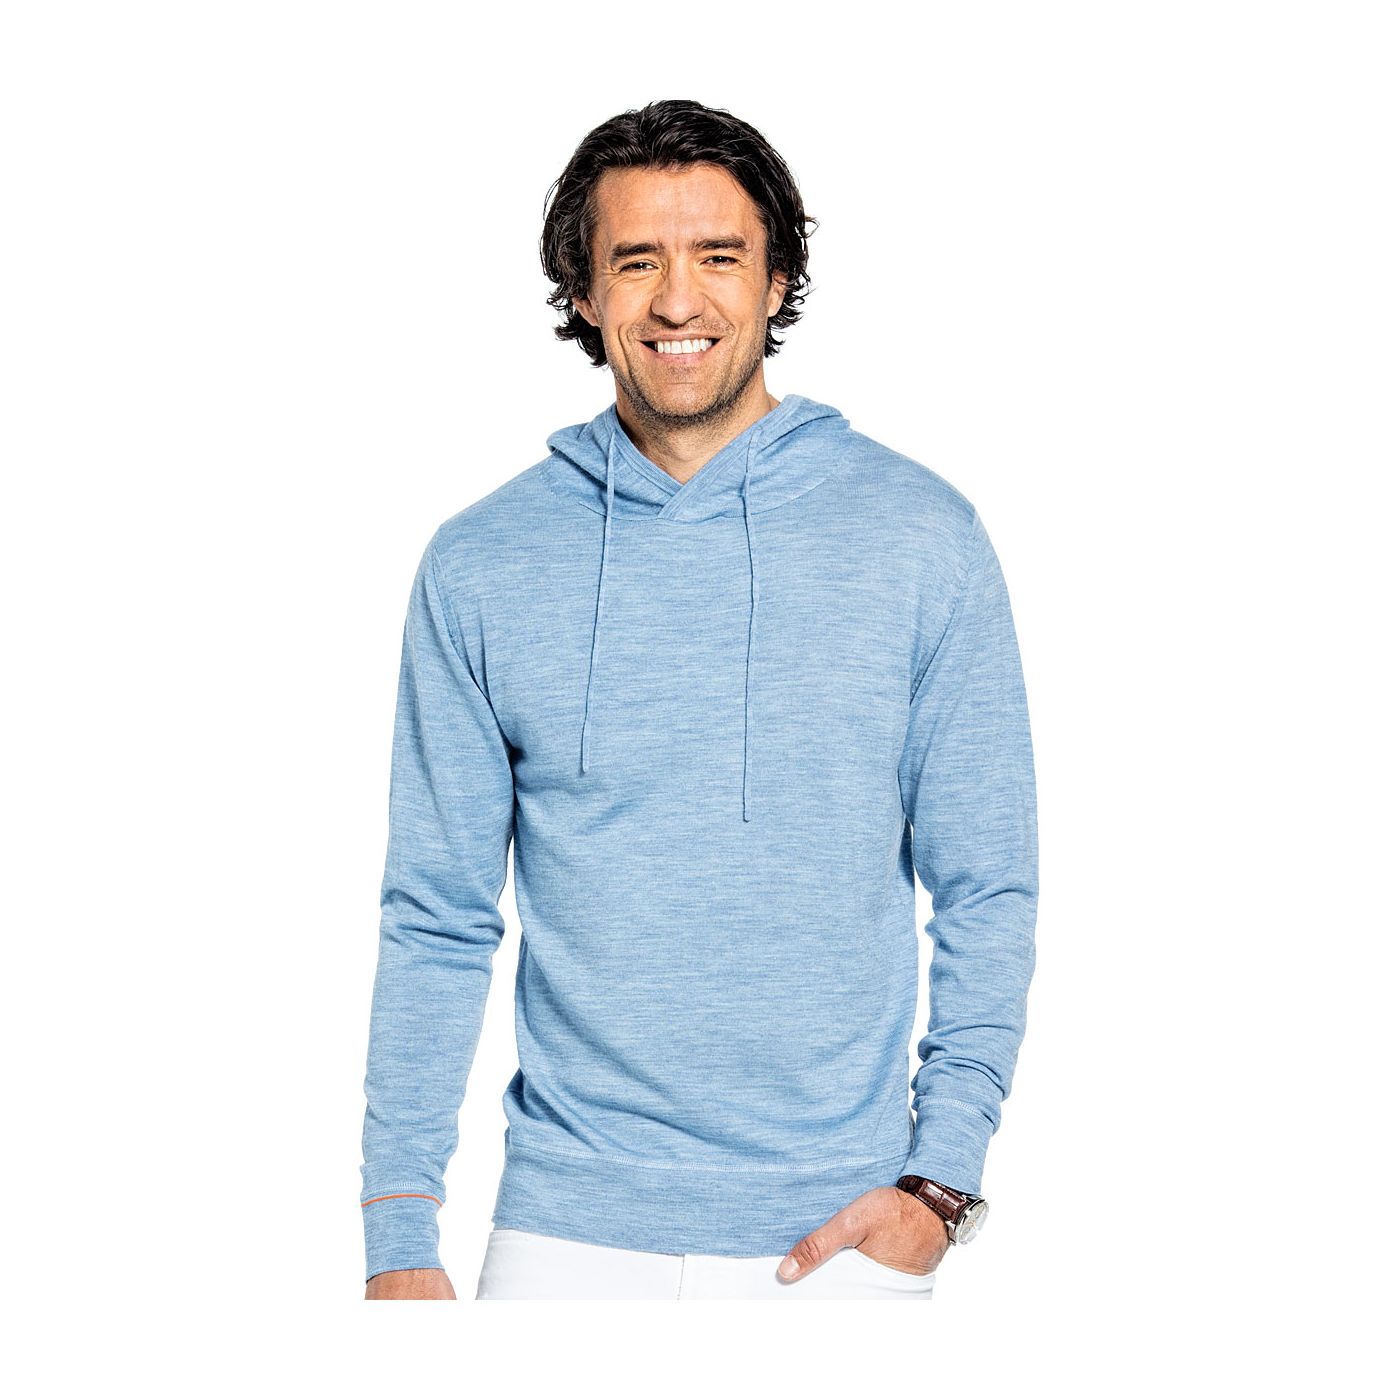 Sweater with hoodie for men made of Merino wool in Light blue